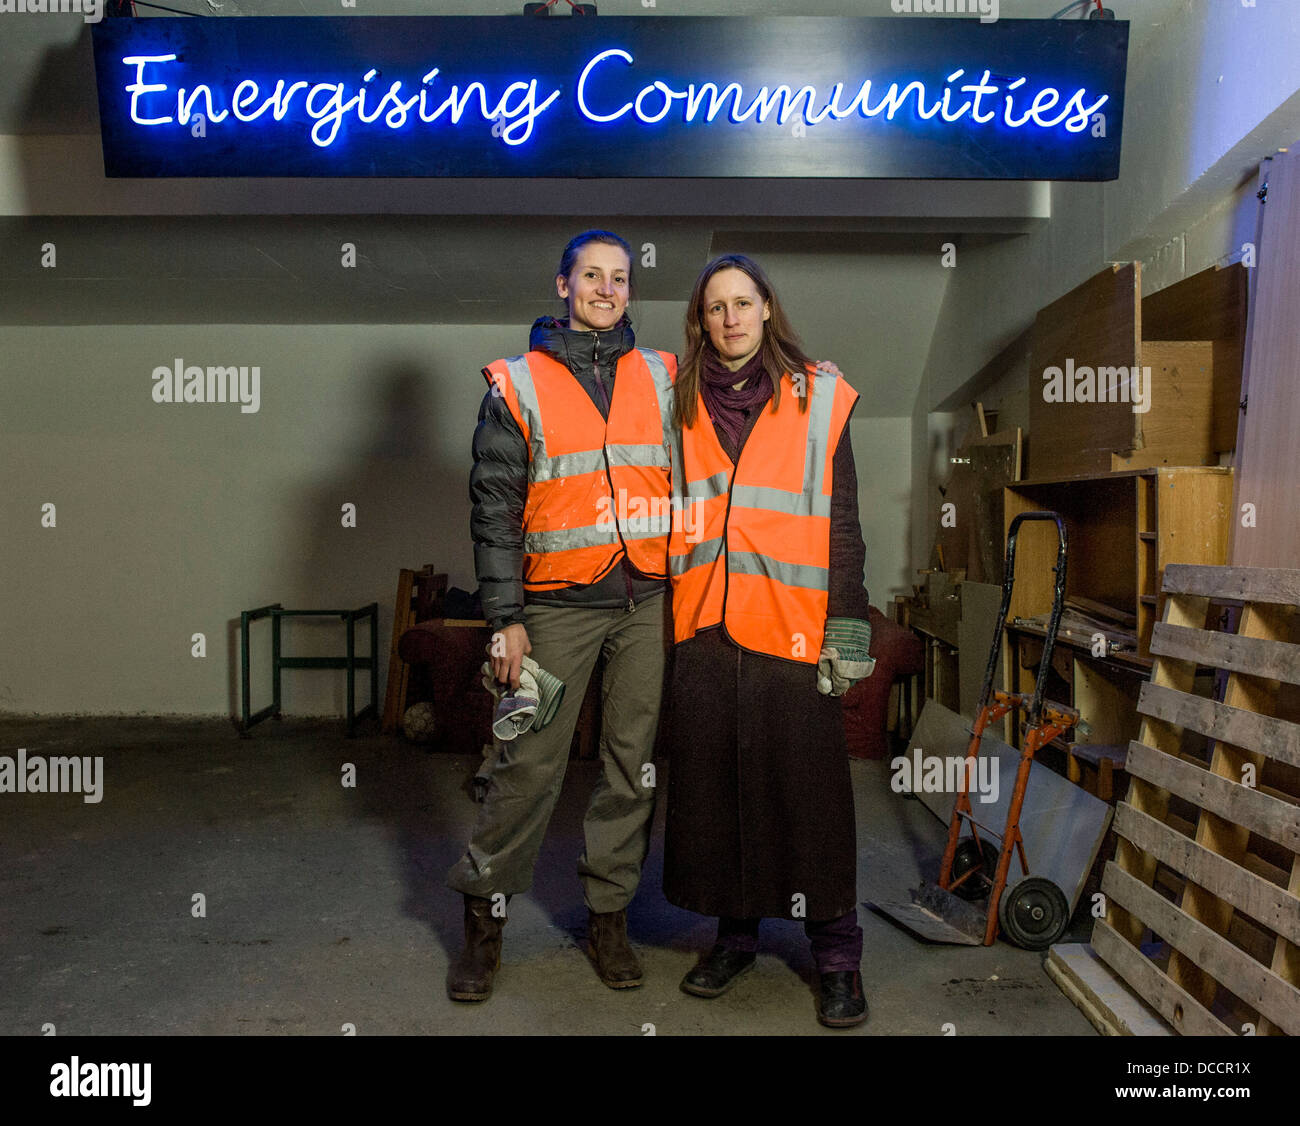 Hannah Lewis 34 founder [long hair centre ] and Rebekah Phillips 34 director The Remakery, Camberwell. Currently renovating an underground car park into a creative space due to open in September . Work started in July 2012 when founder Hannah Lewis 34 won was awarded planning permission by Lambeth Council and 100K grant after winning most votes in a poll organised by the council. Hannah got the idea from transition town concept in Brixton then met other like minded types like environmental policy adviser Rebekah Phillips at Re use conference. Renovation provides a training opportunity Stock Photo